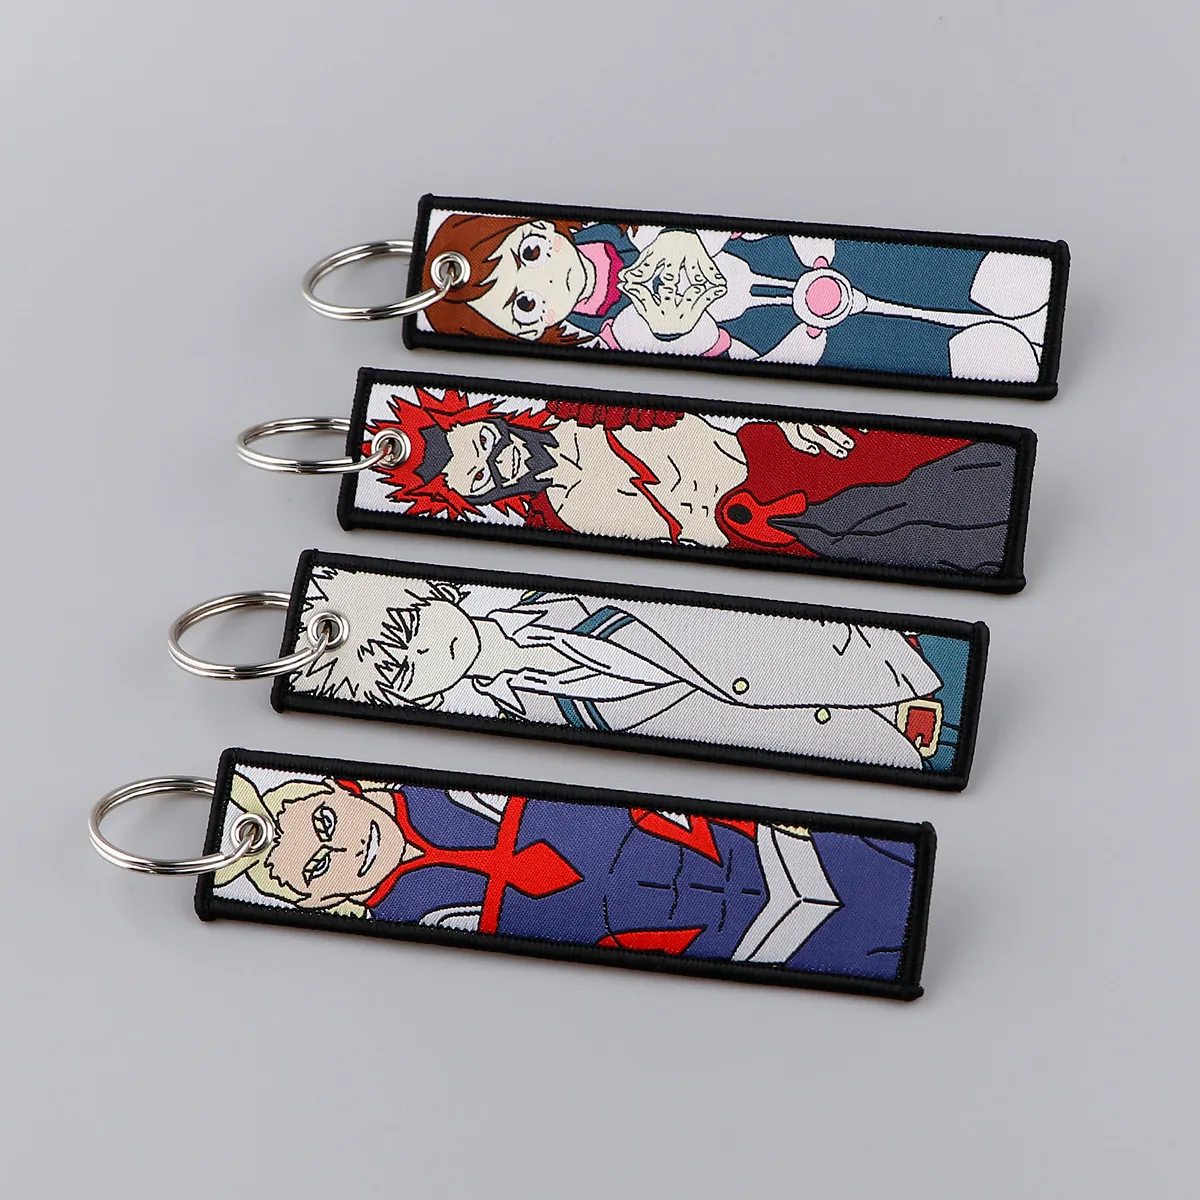 japanese anime my hero academia keytag embroidery key fobs for motorcycles cars backpack chaveiro key tag fashion key ring gifts